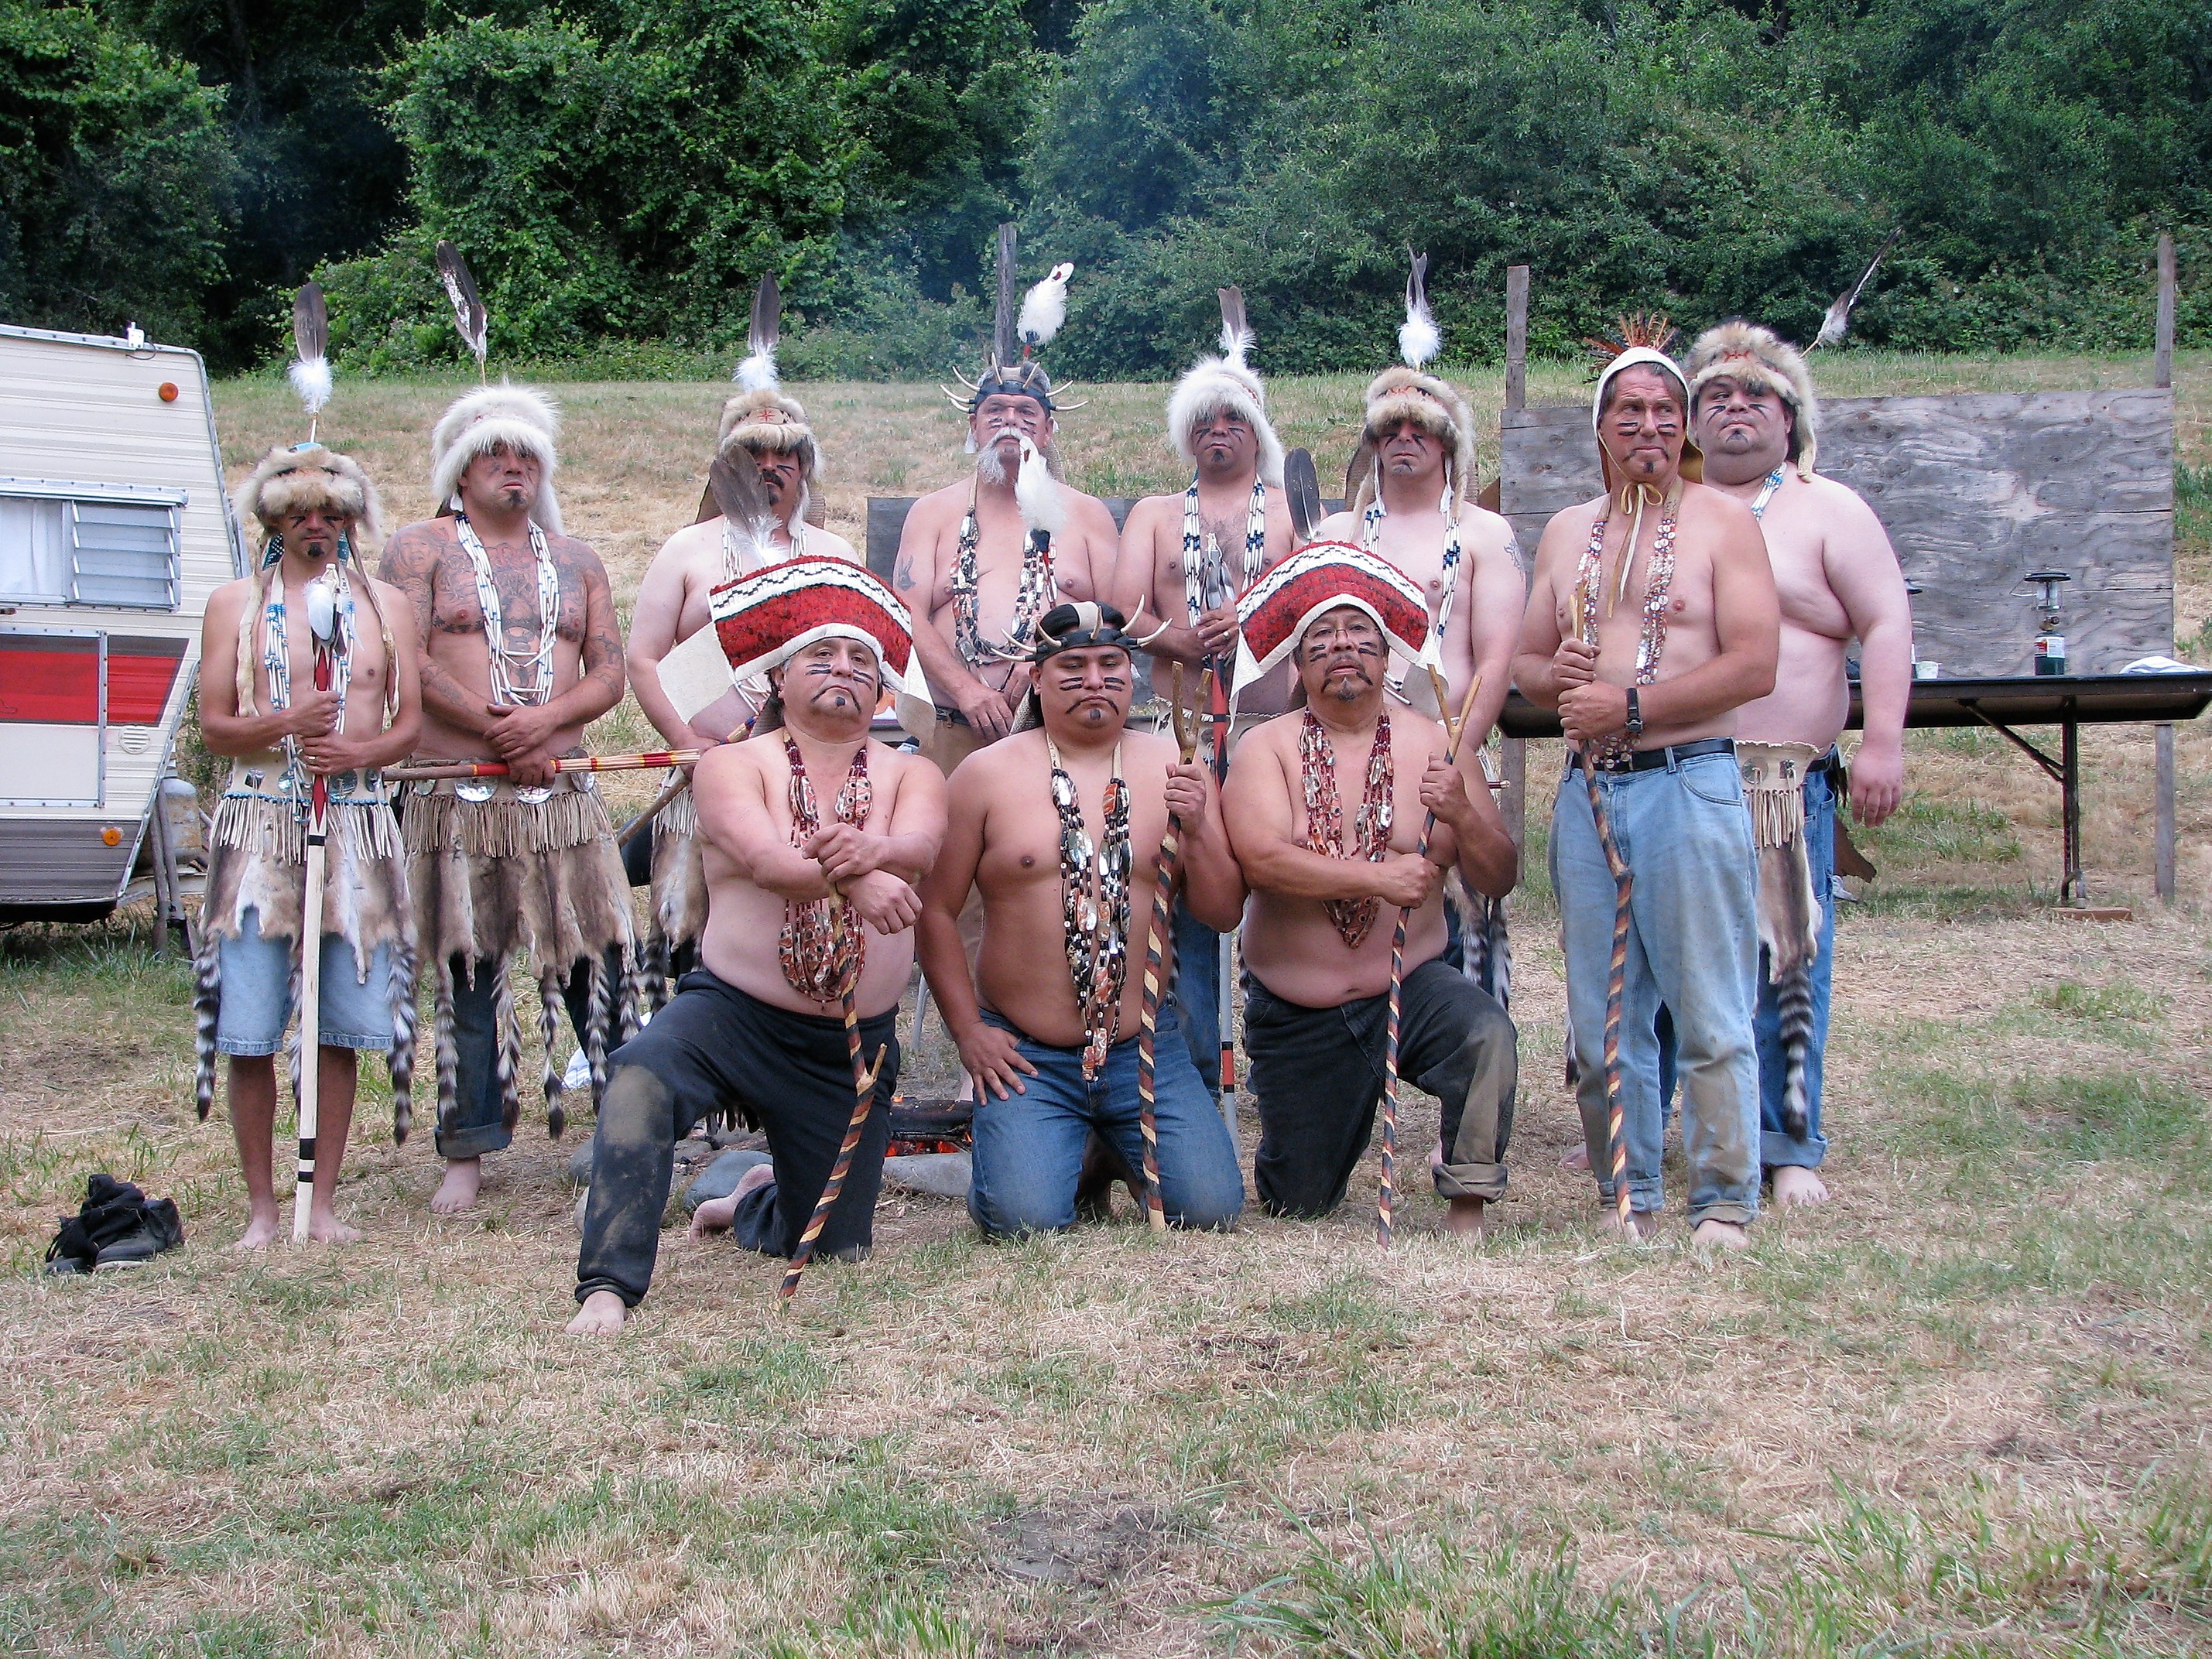 Eleven men in tribal regalia including headbands, bead necklaces, hide aprons and dance sticks standing and kneeling in a meadow